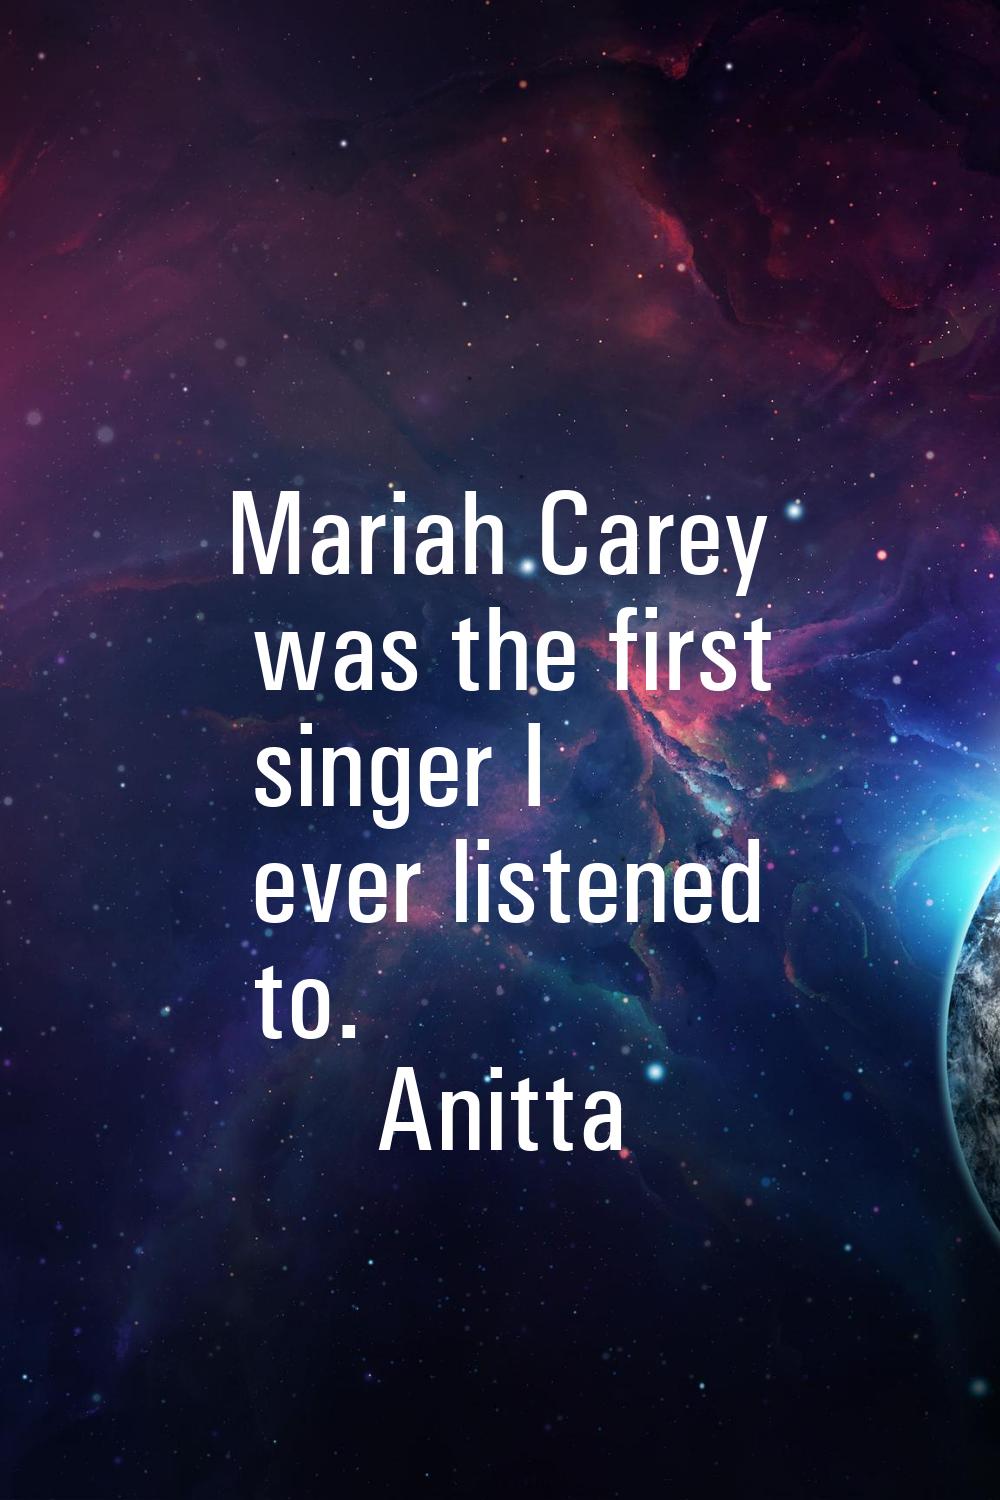 Mariah Carey was the first singer I ever listened to.